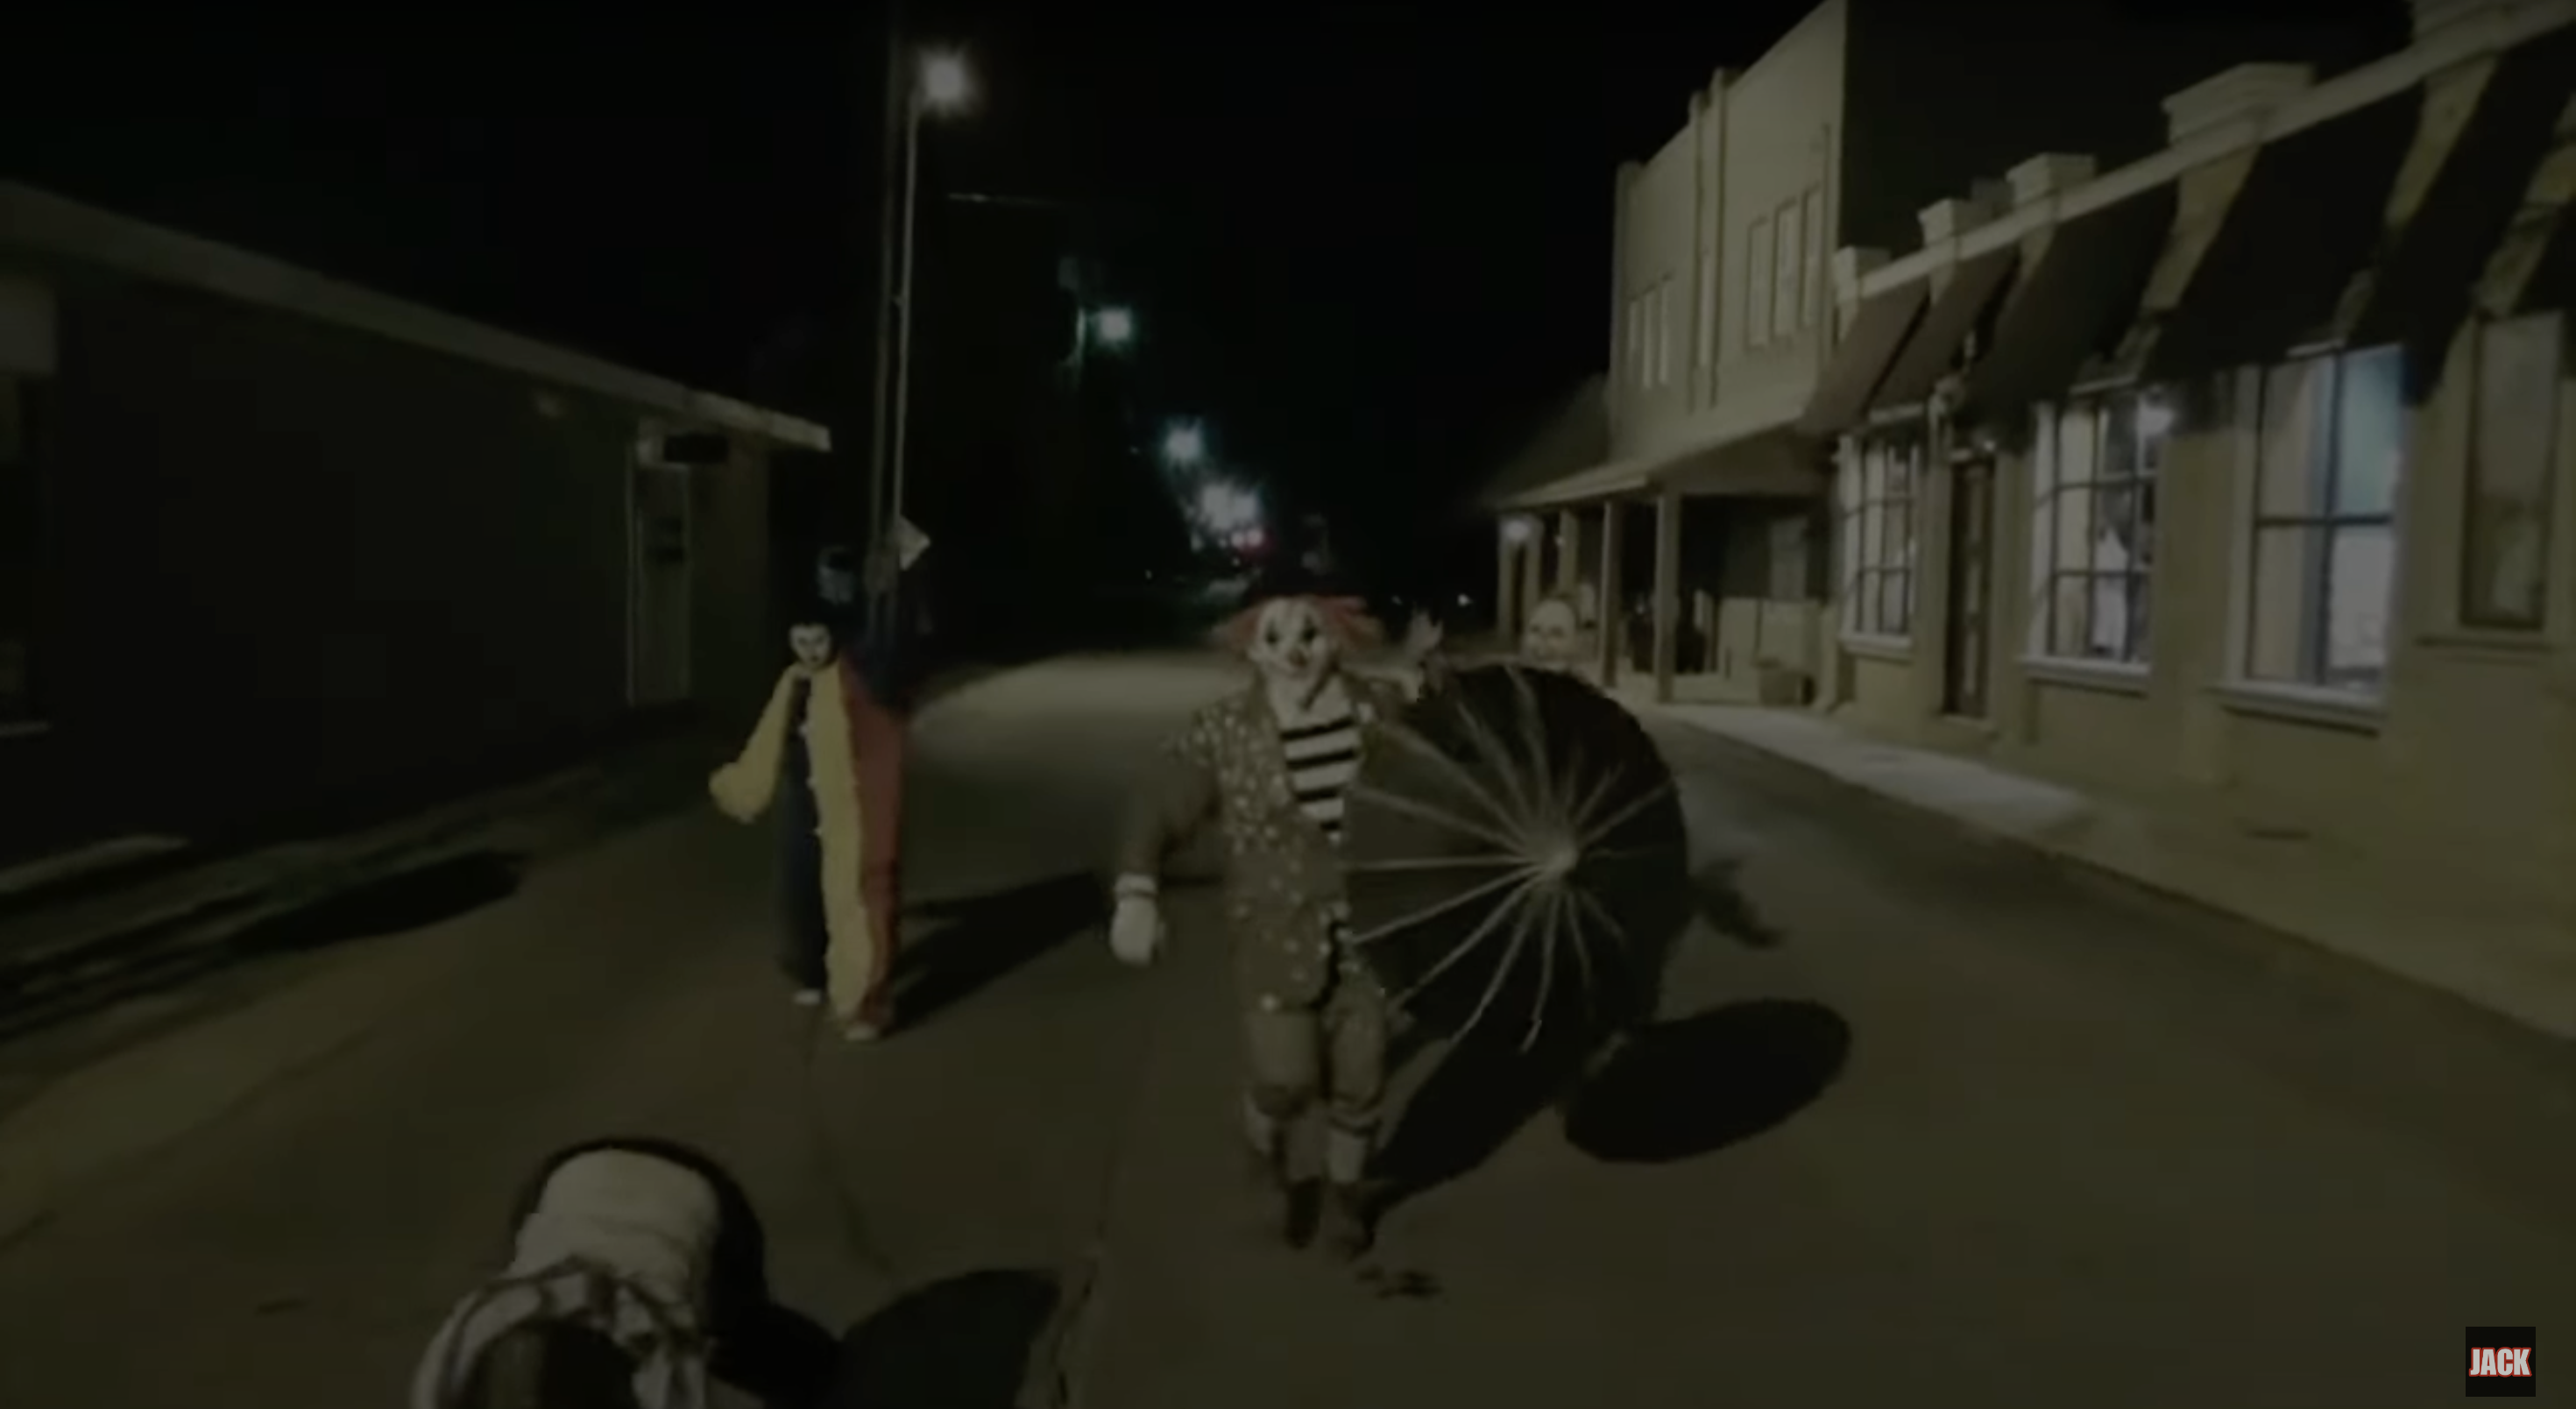 A trio of clowns walk down an alley on security cam footage